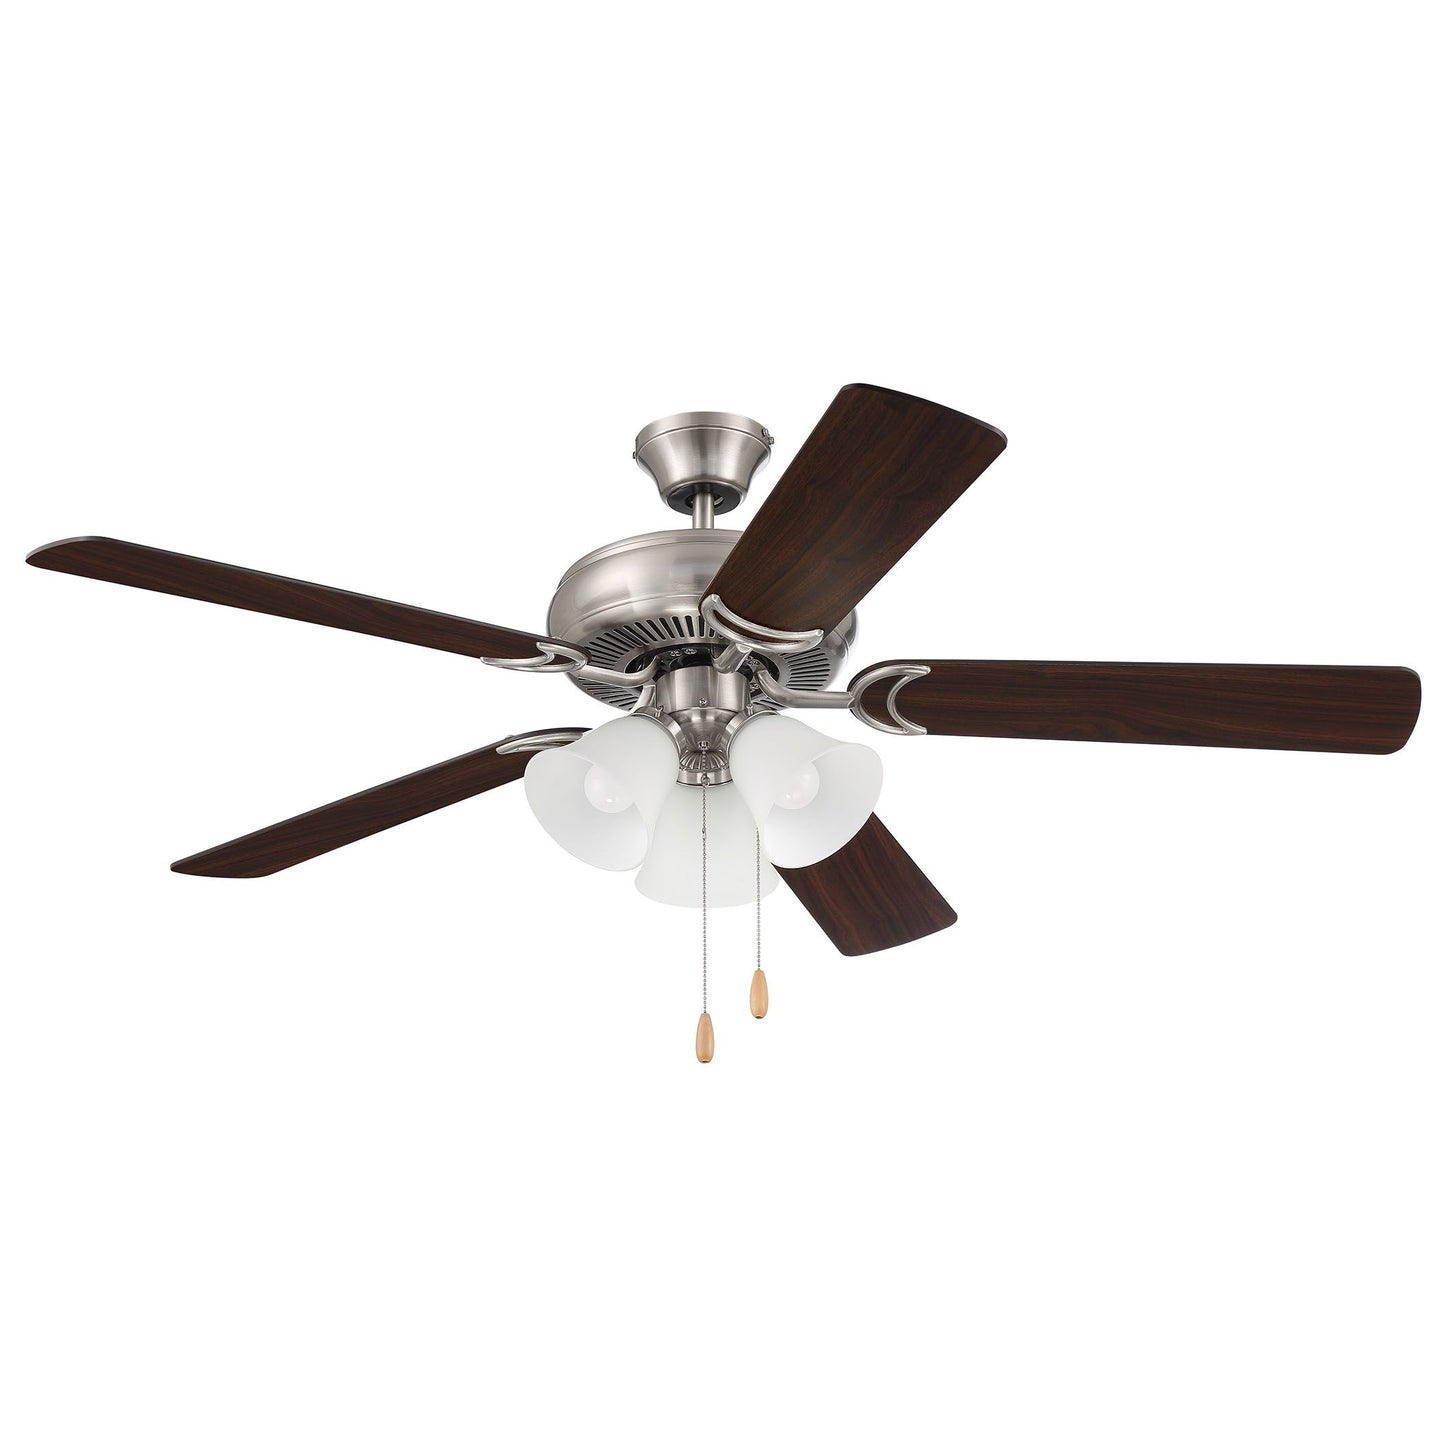 DCF52BNK5C3W - Decorator's Choice 52" 5 Blade Ceiling Fan with Light Kit - Pull Chain - Brushed Poli